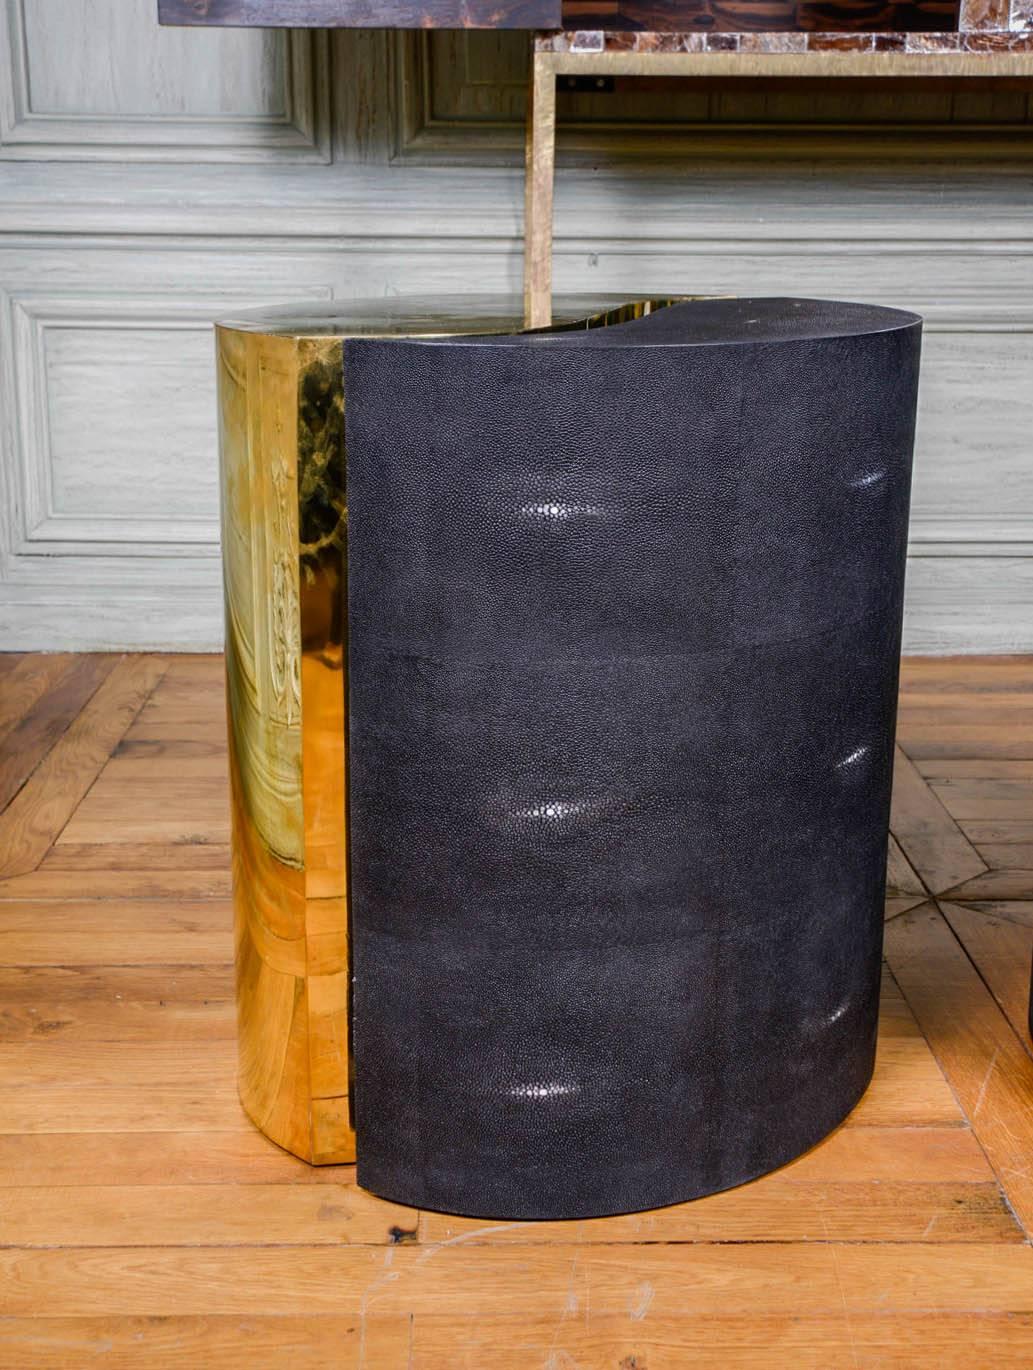 Pair of yin and yang pedestals in brass and grey shagreen, creation by Gallery Glustin, limited edition to 8 pieces